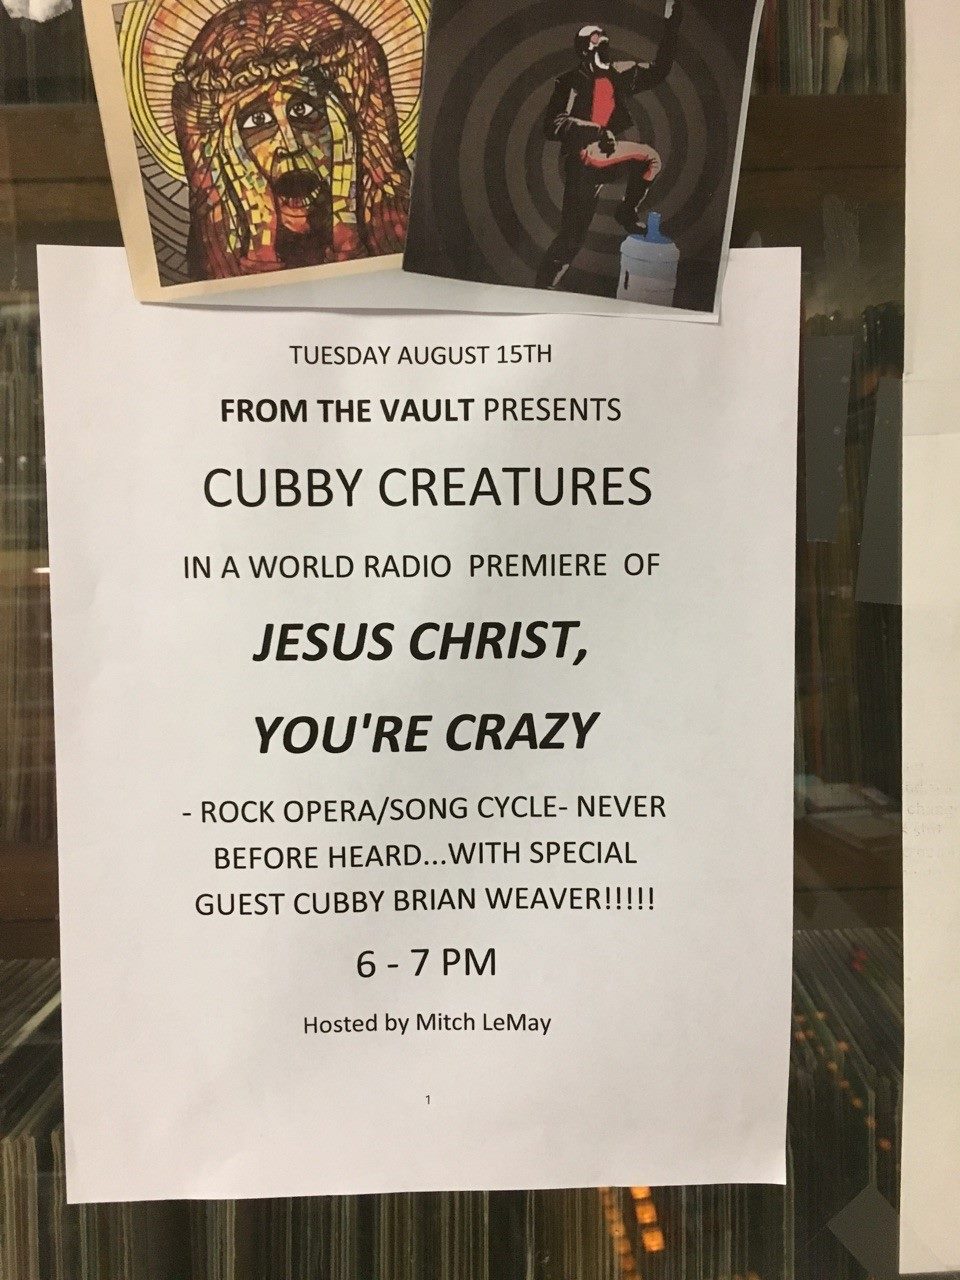 Tuesday, August 15th From the Vault Presents Cubby Creatures in a world radio premeire of Jesus Christ, You're Crazy - rock opera/song cycle - never before heard...with special guest Cubby Brian Weaver, 6-7PM, hosted by Mitch LeMay